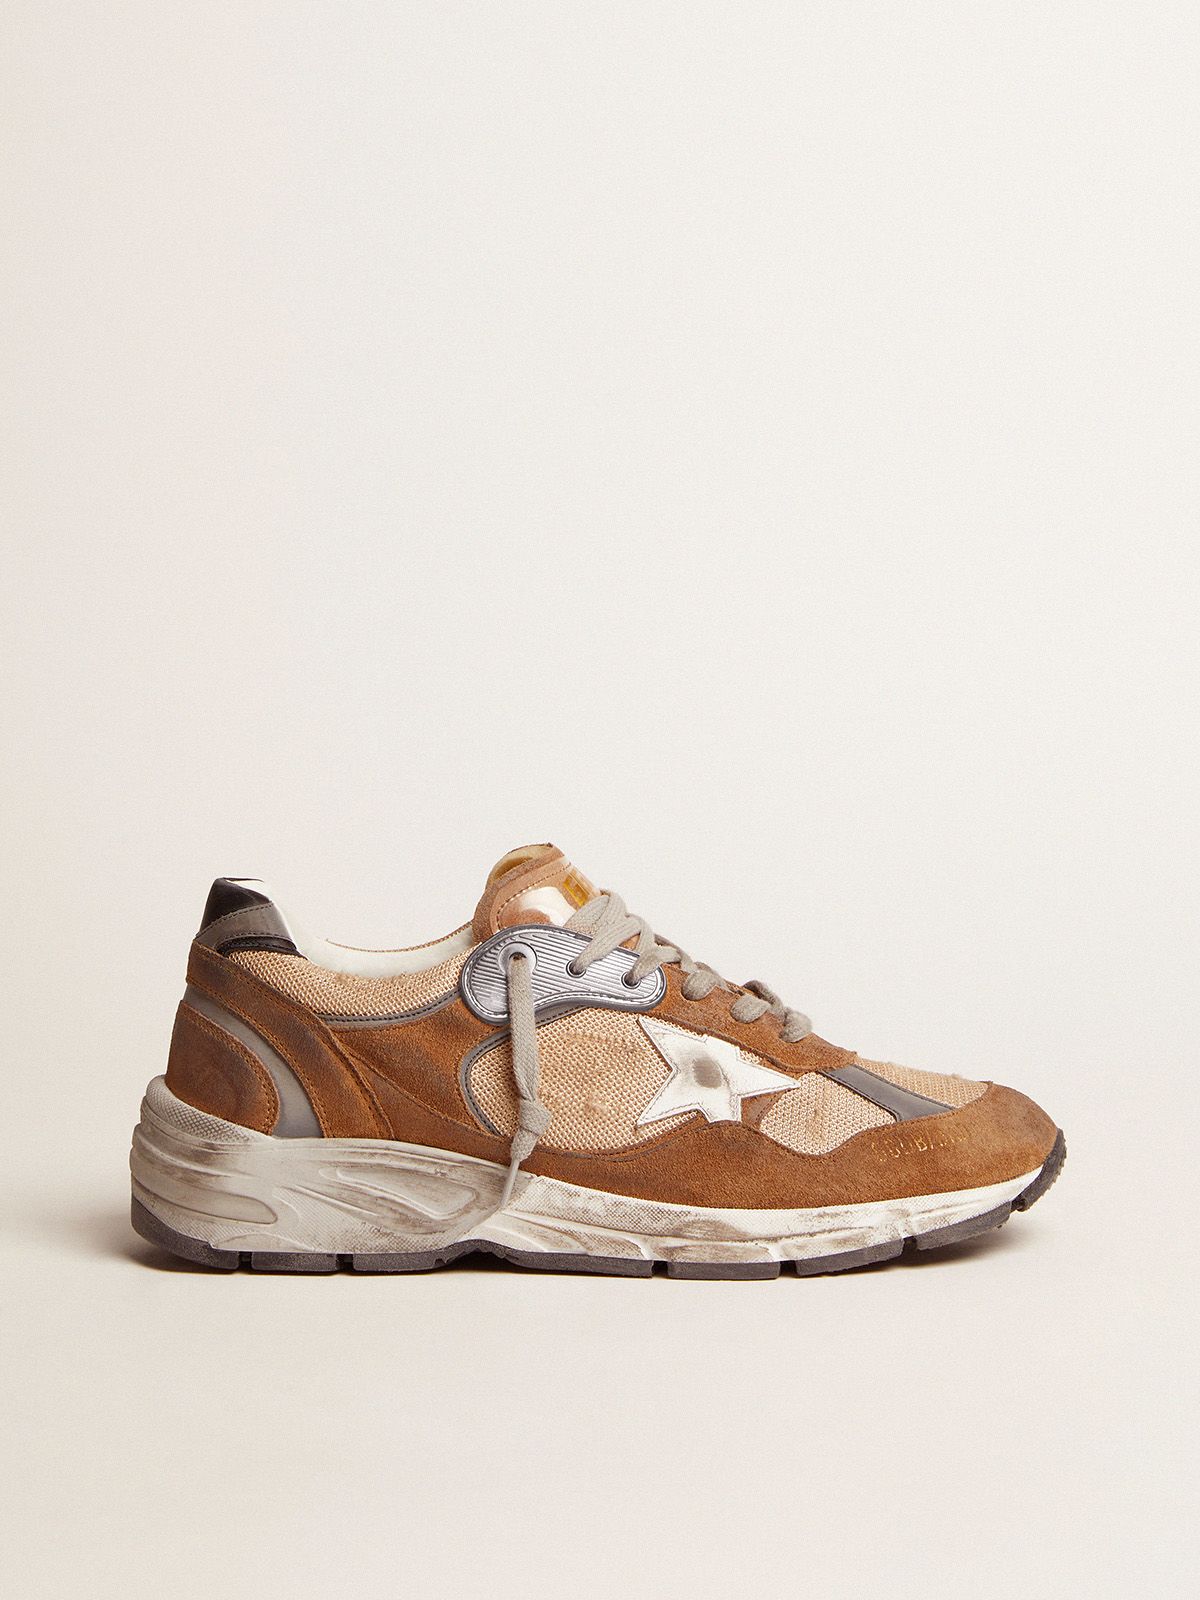 Goldengoose Ball Star Dad-Star sneakers in tobacco-colored mesh and suede with white leather star and black leather heel tab